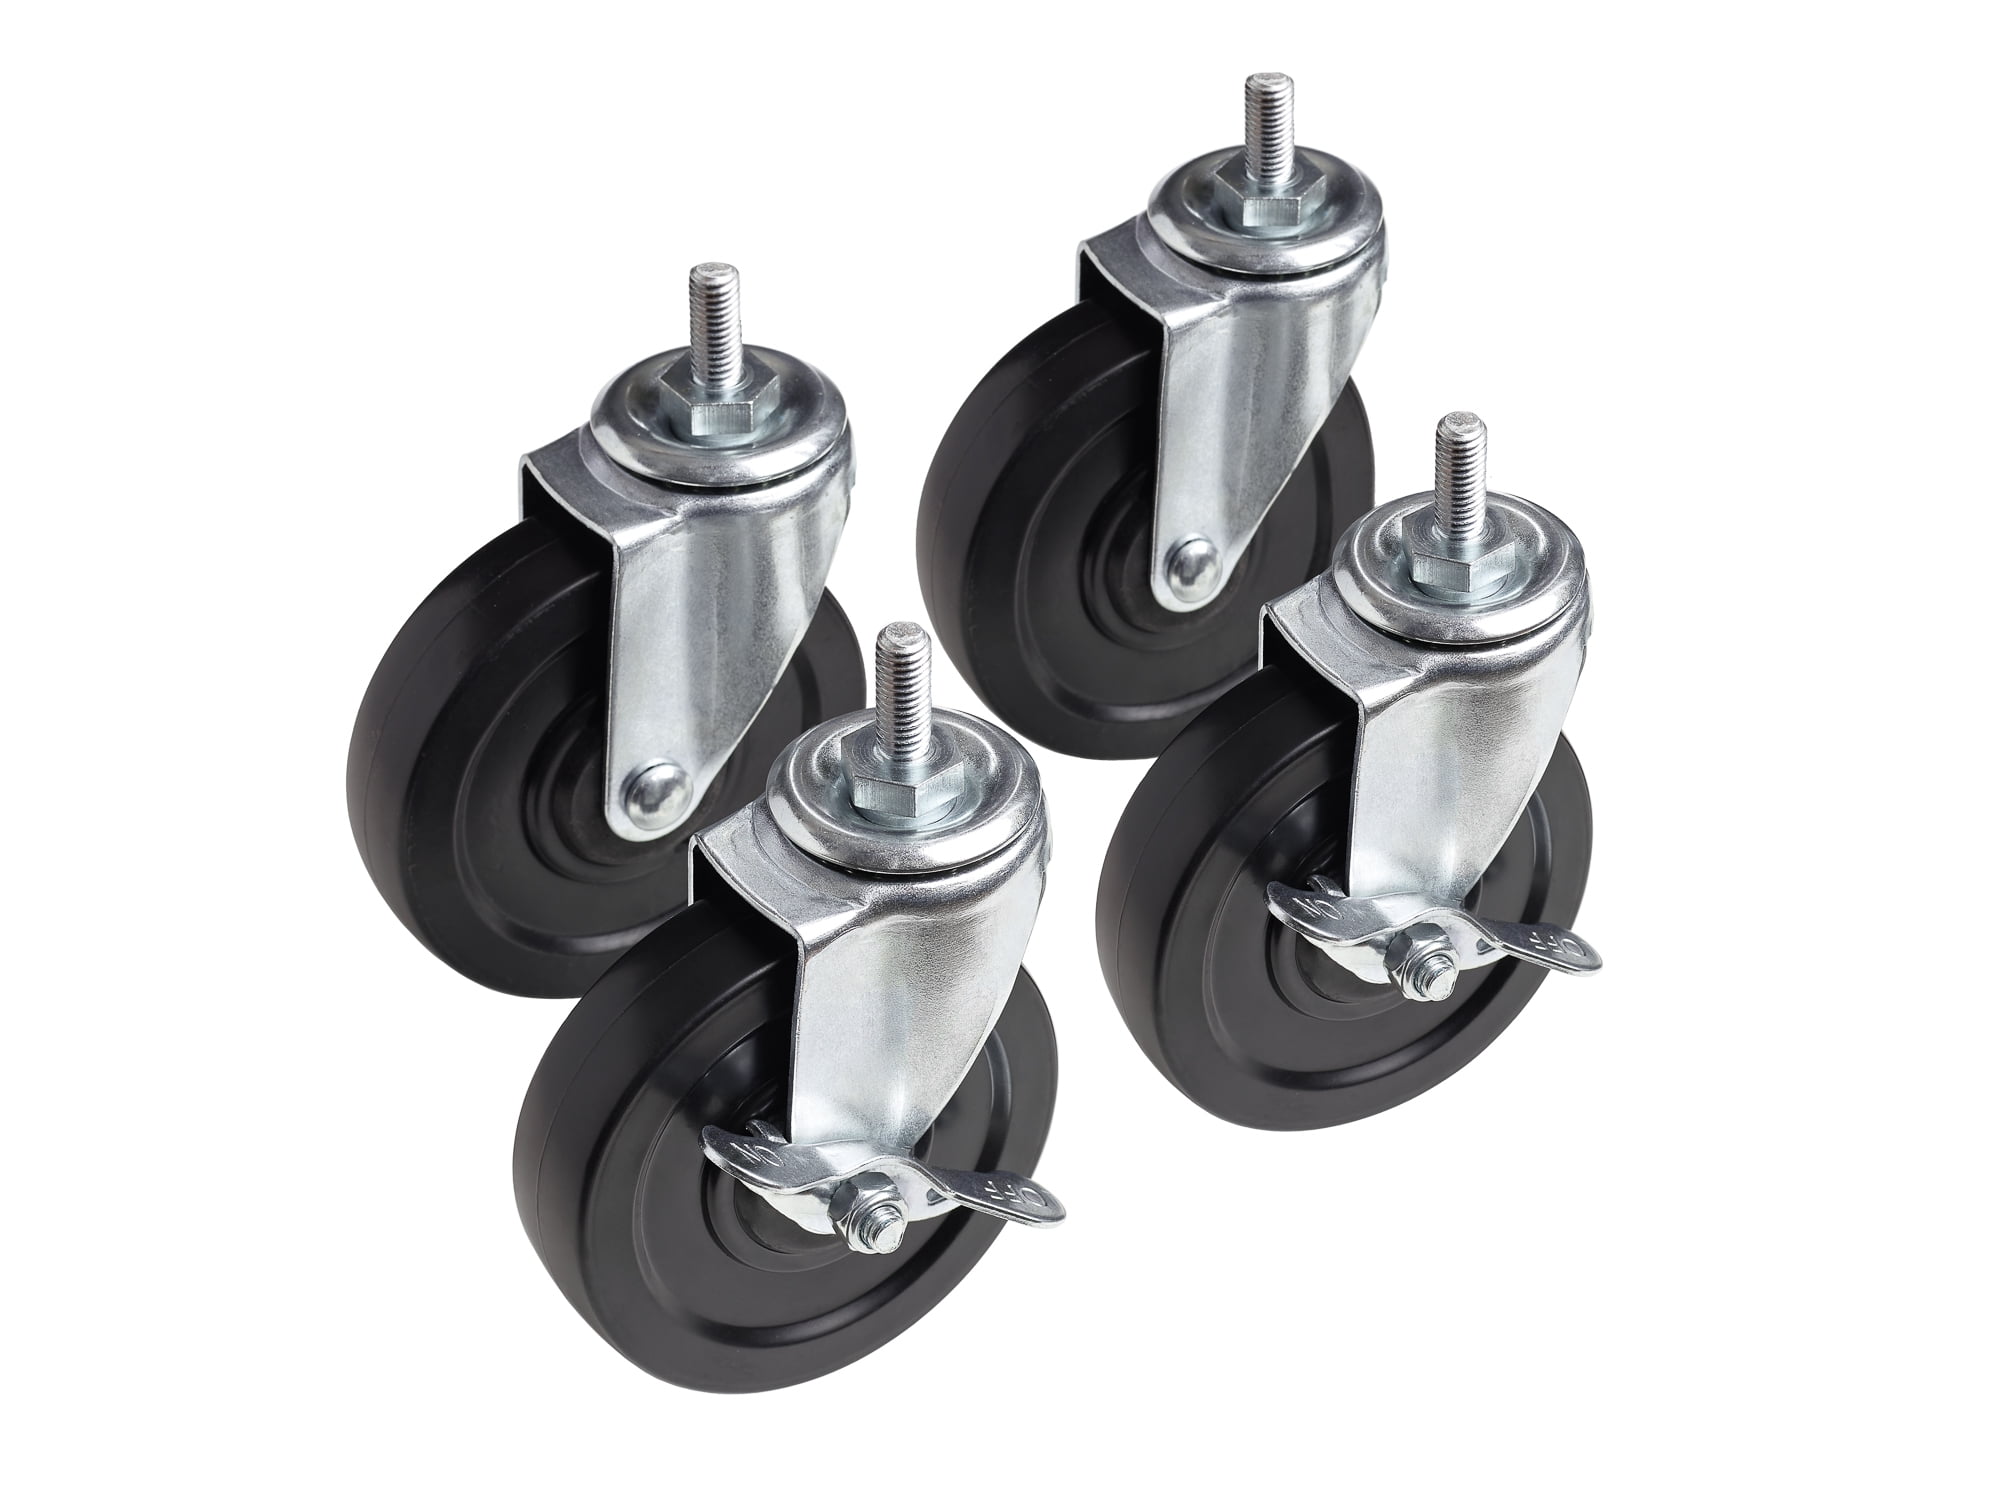 StorageMax Casters for Wire Shelving 600 lbs Weight Capacity 5 Locking Swivel Set of 4 Industrial Grade